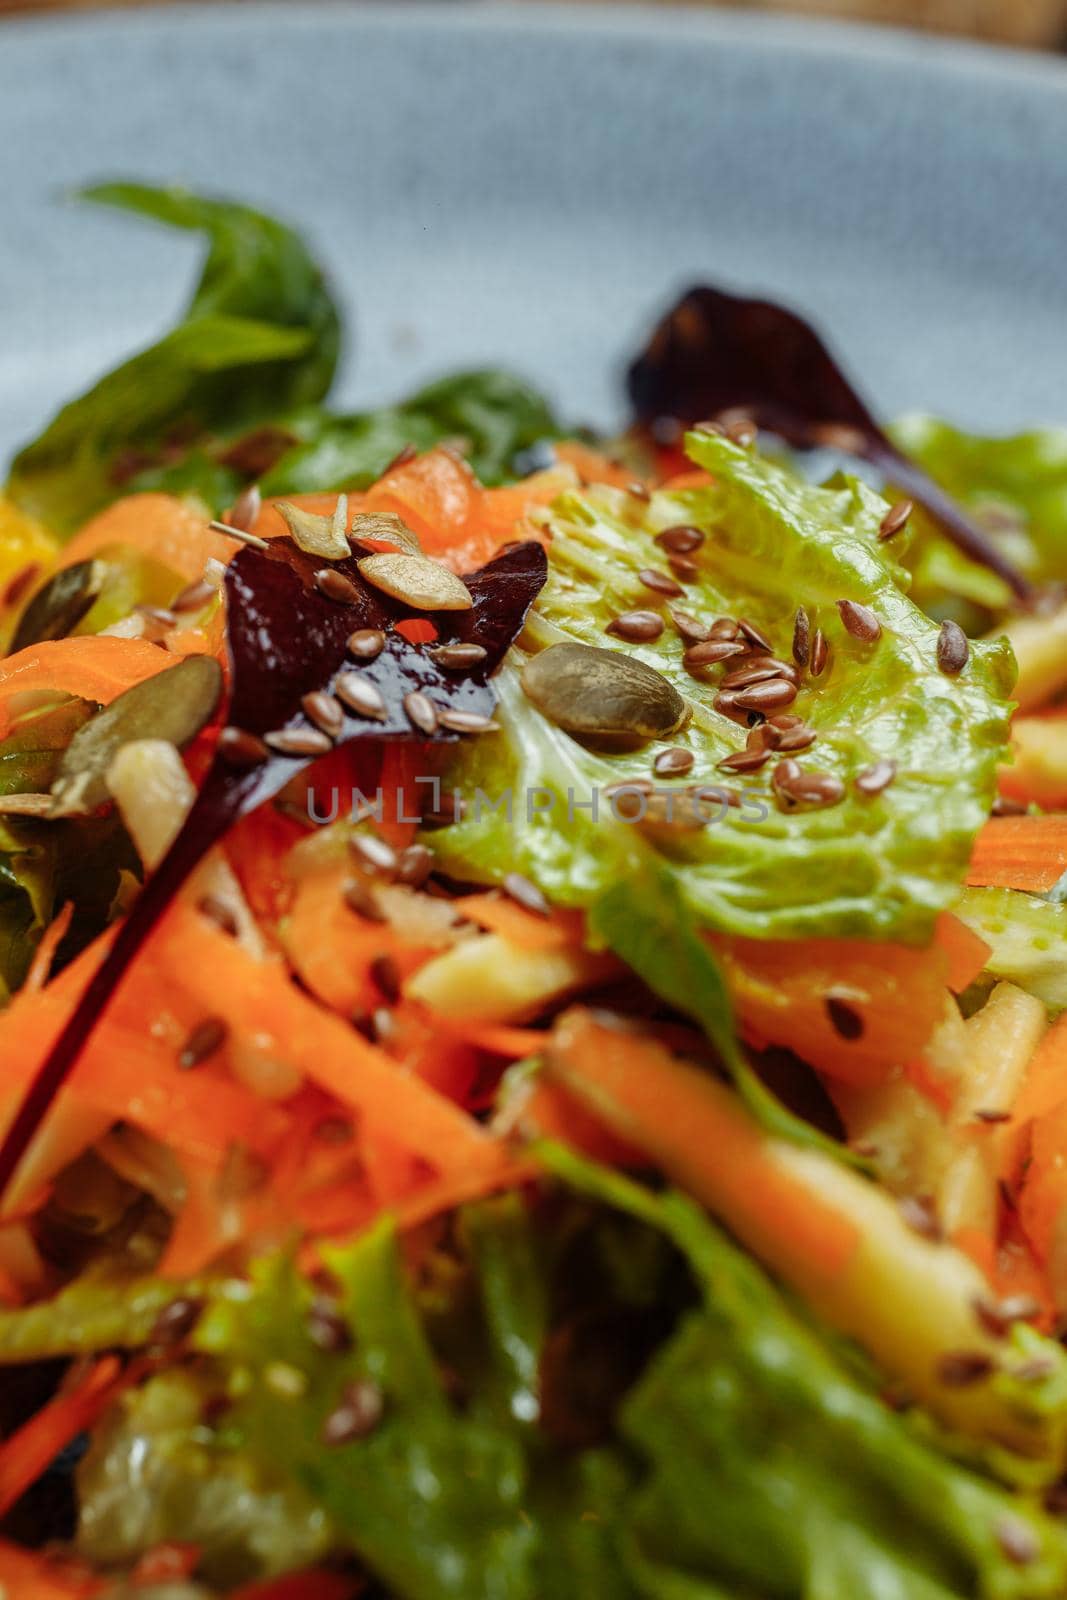 Sicilian salad with fennel, oranges, grapefruit and radicchio salad with balsamic dressing on a blue linen tablecloth. healthy summer italian food by UcheaD